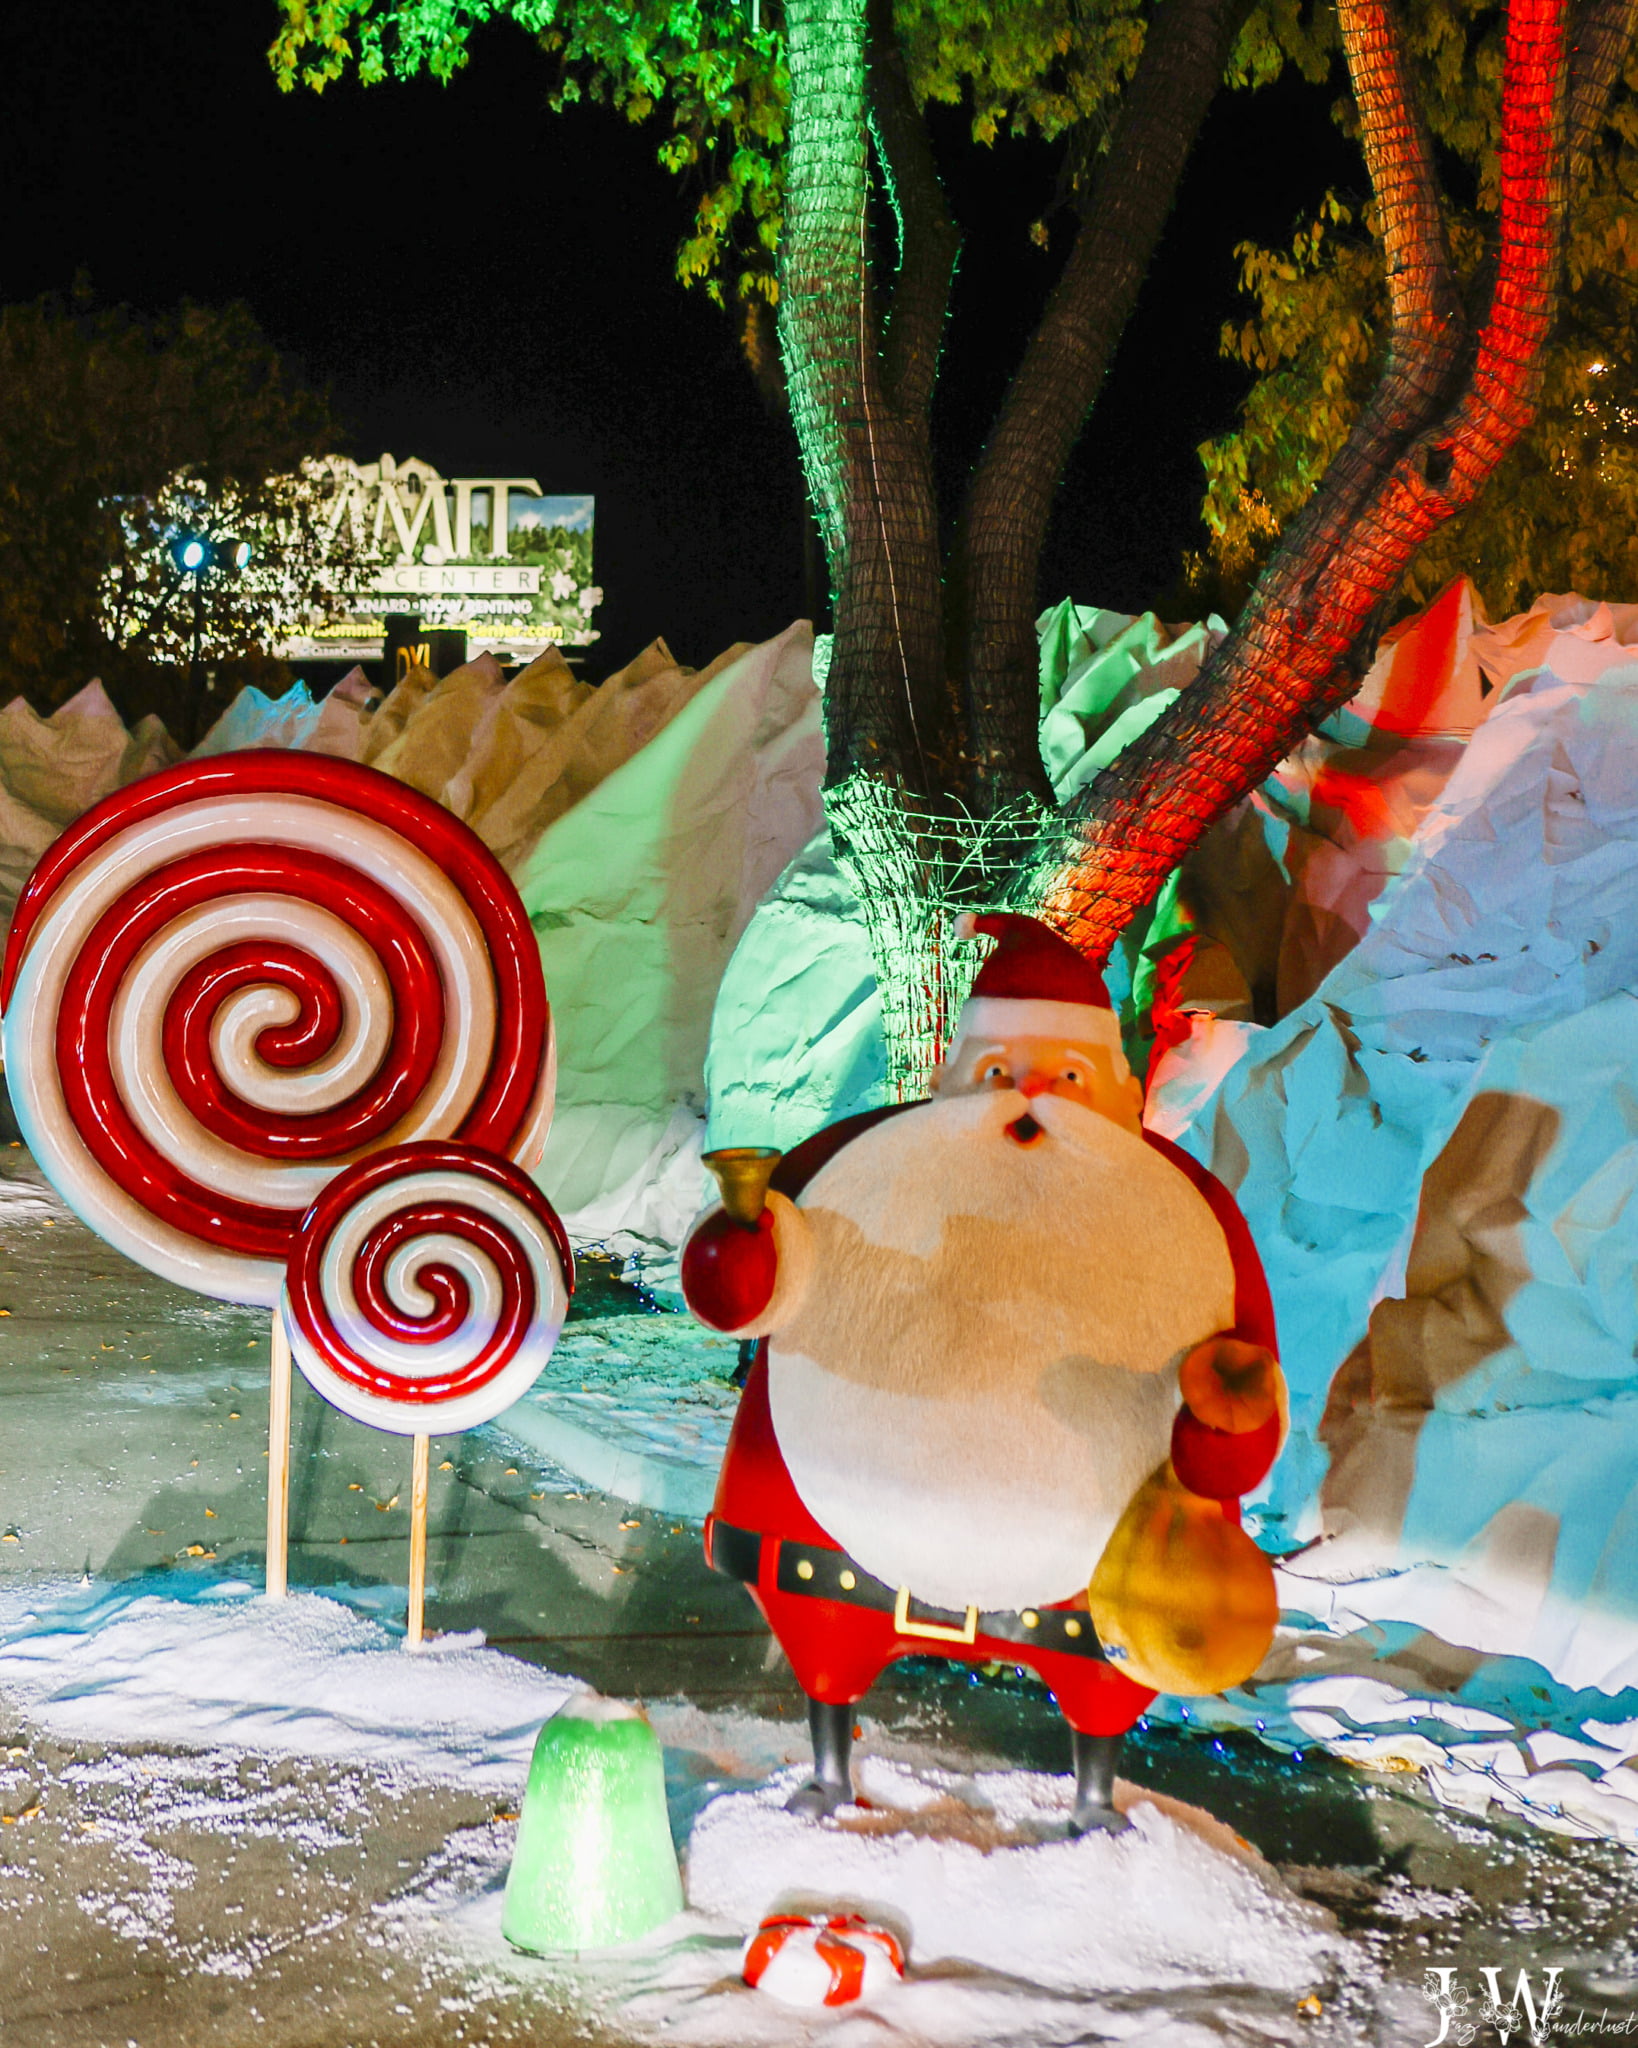 Southern California holiday decorations. Photography by Jaz Wanderlust.